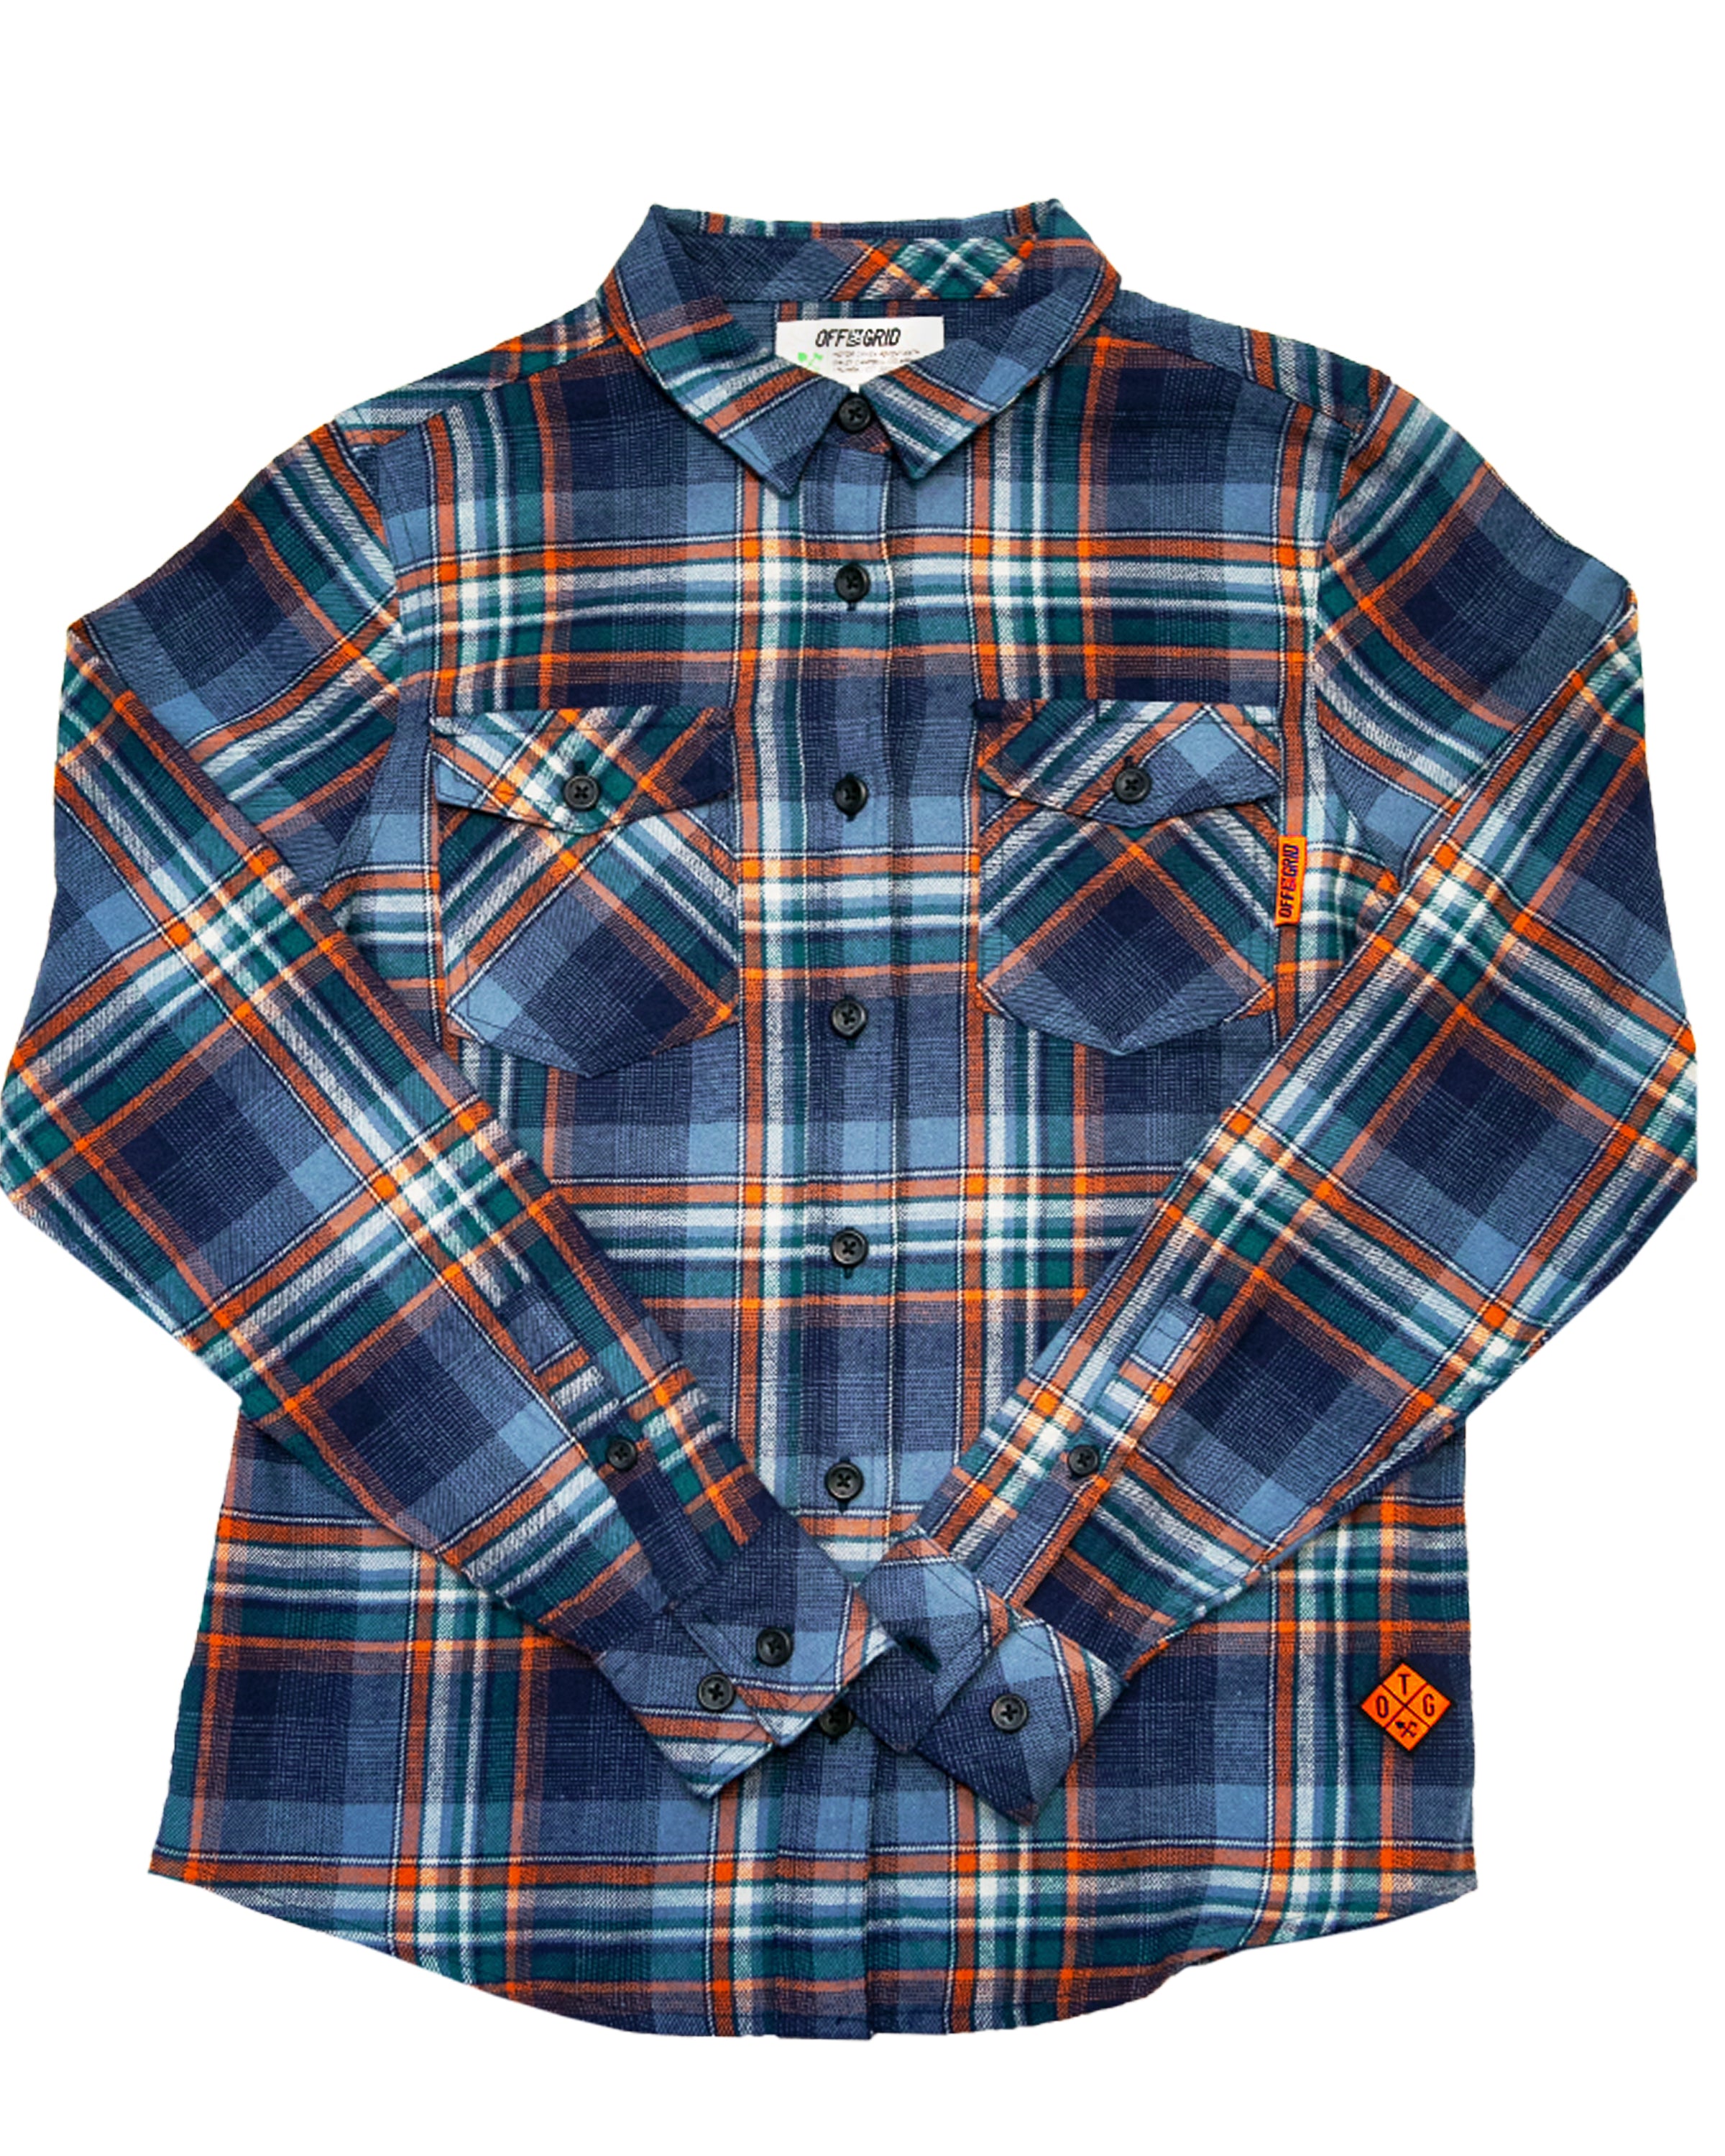 Campbell Women's Flannel